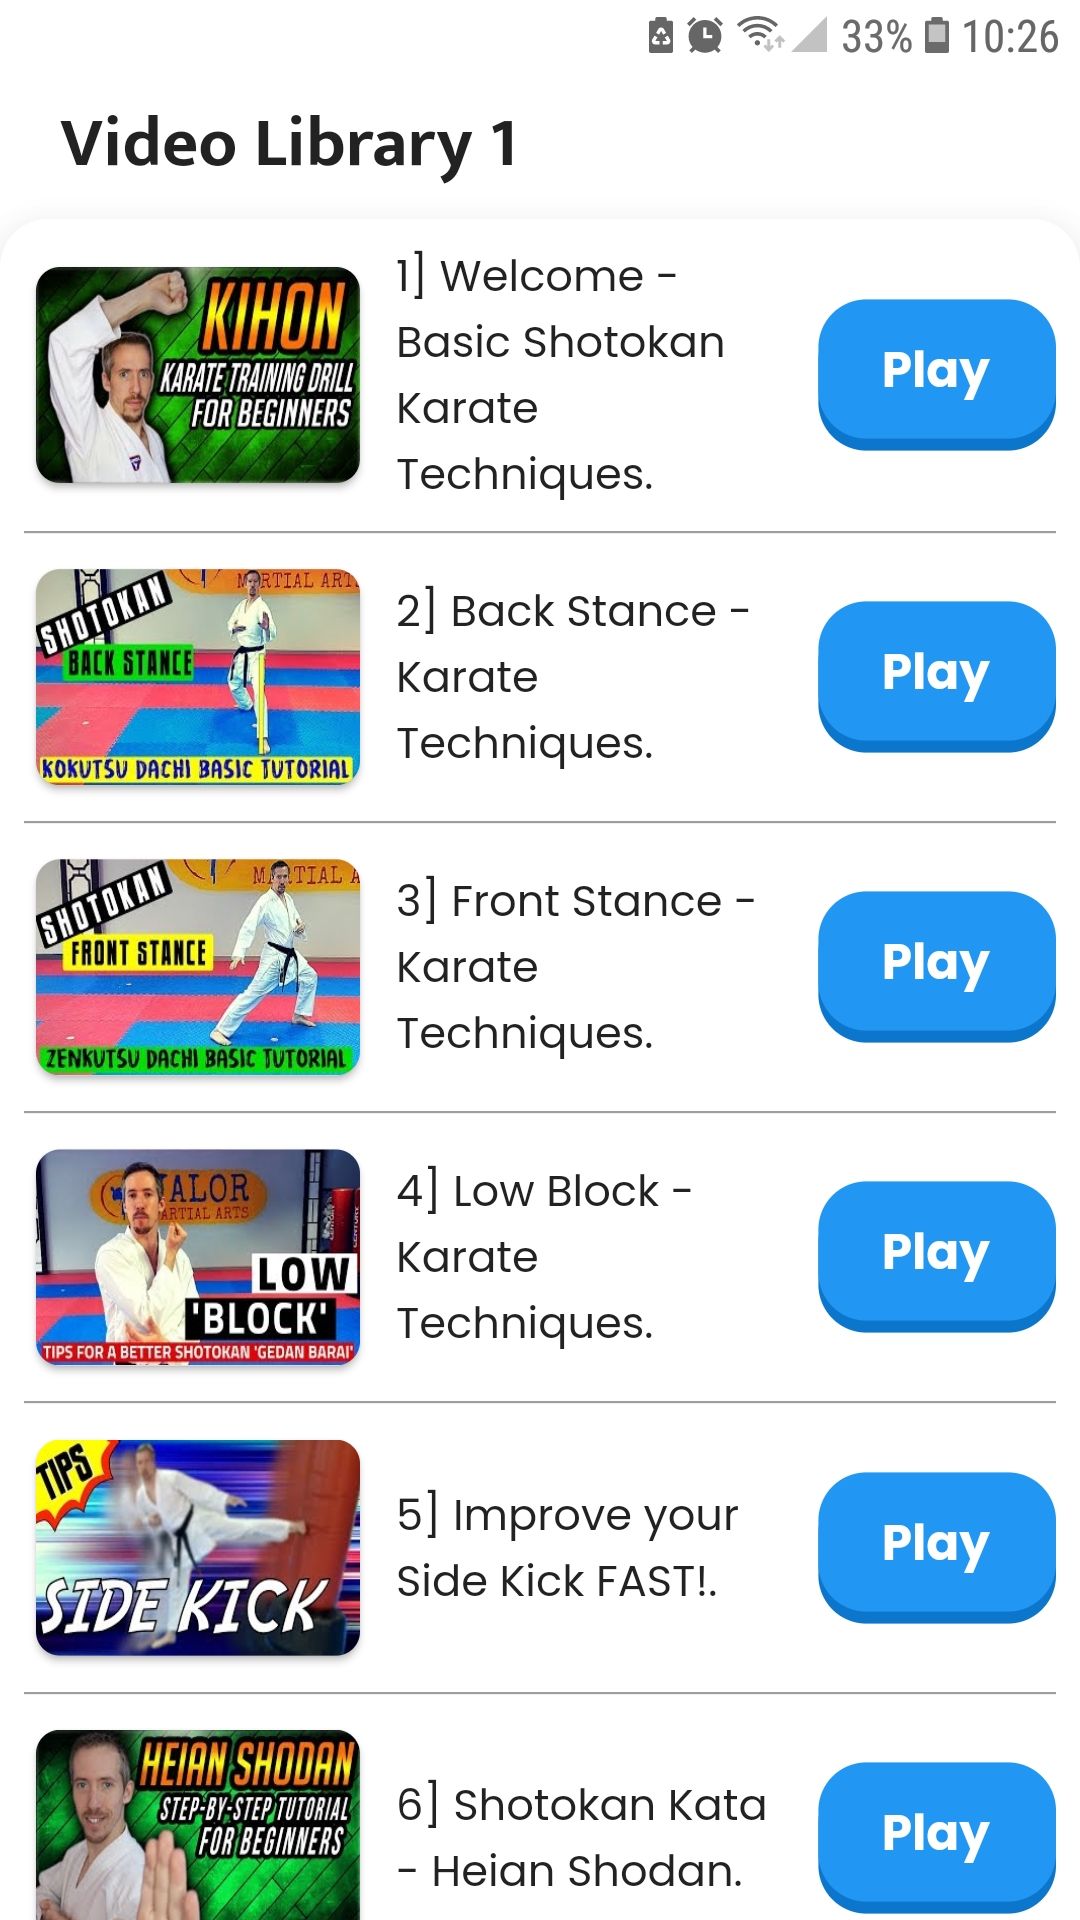 Karate training techniques video library 1 mobile app